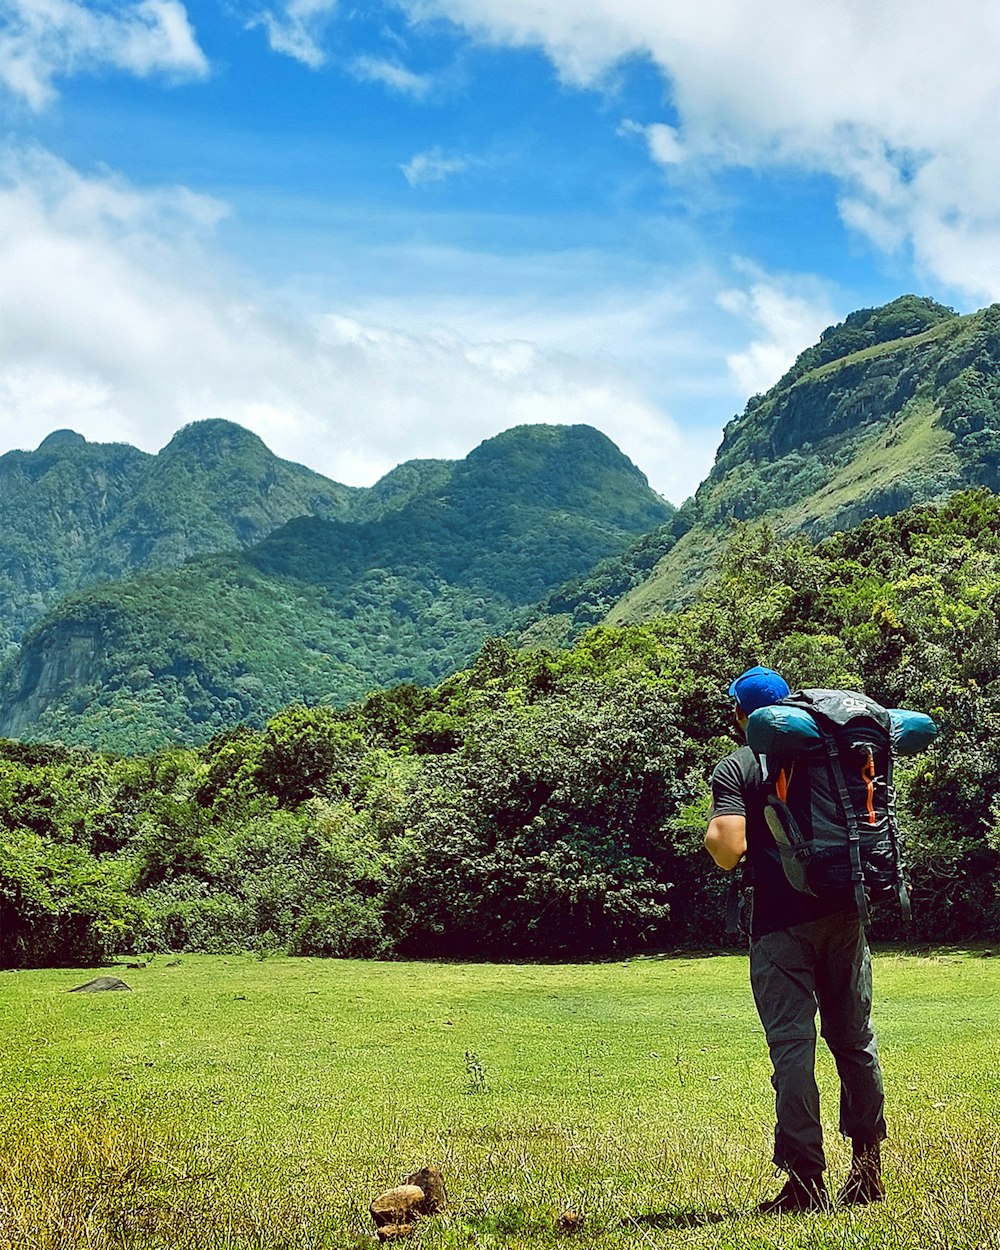 a person with a backpack standing in a grassy field with trees and mountains in the background